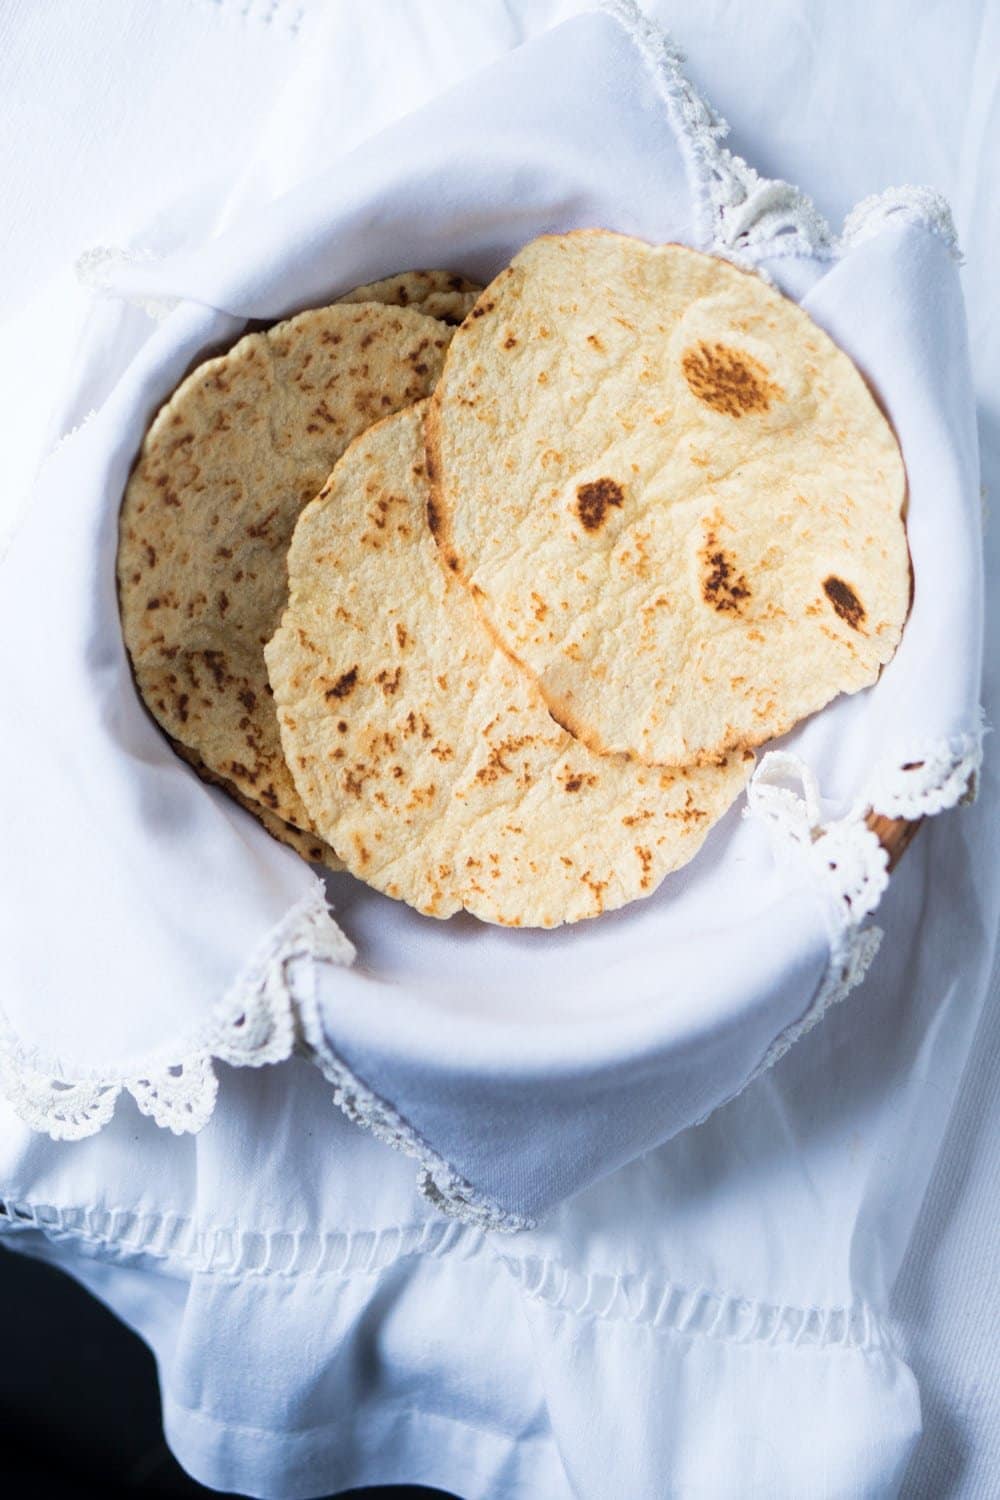 Gluten free and keto tortillas in a basket with white cloth 